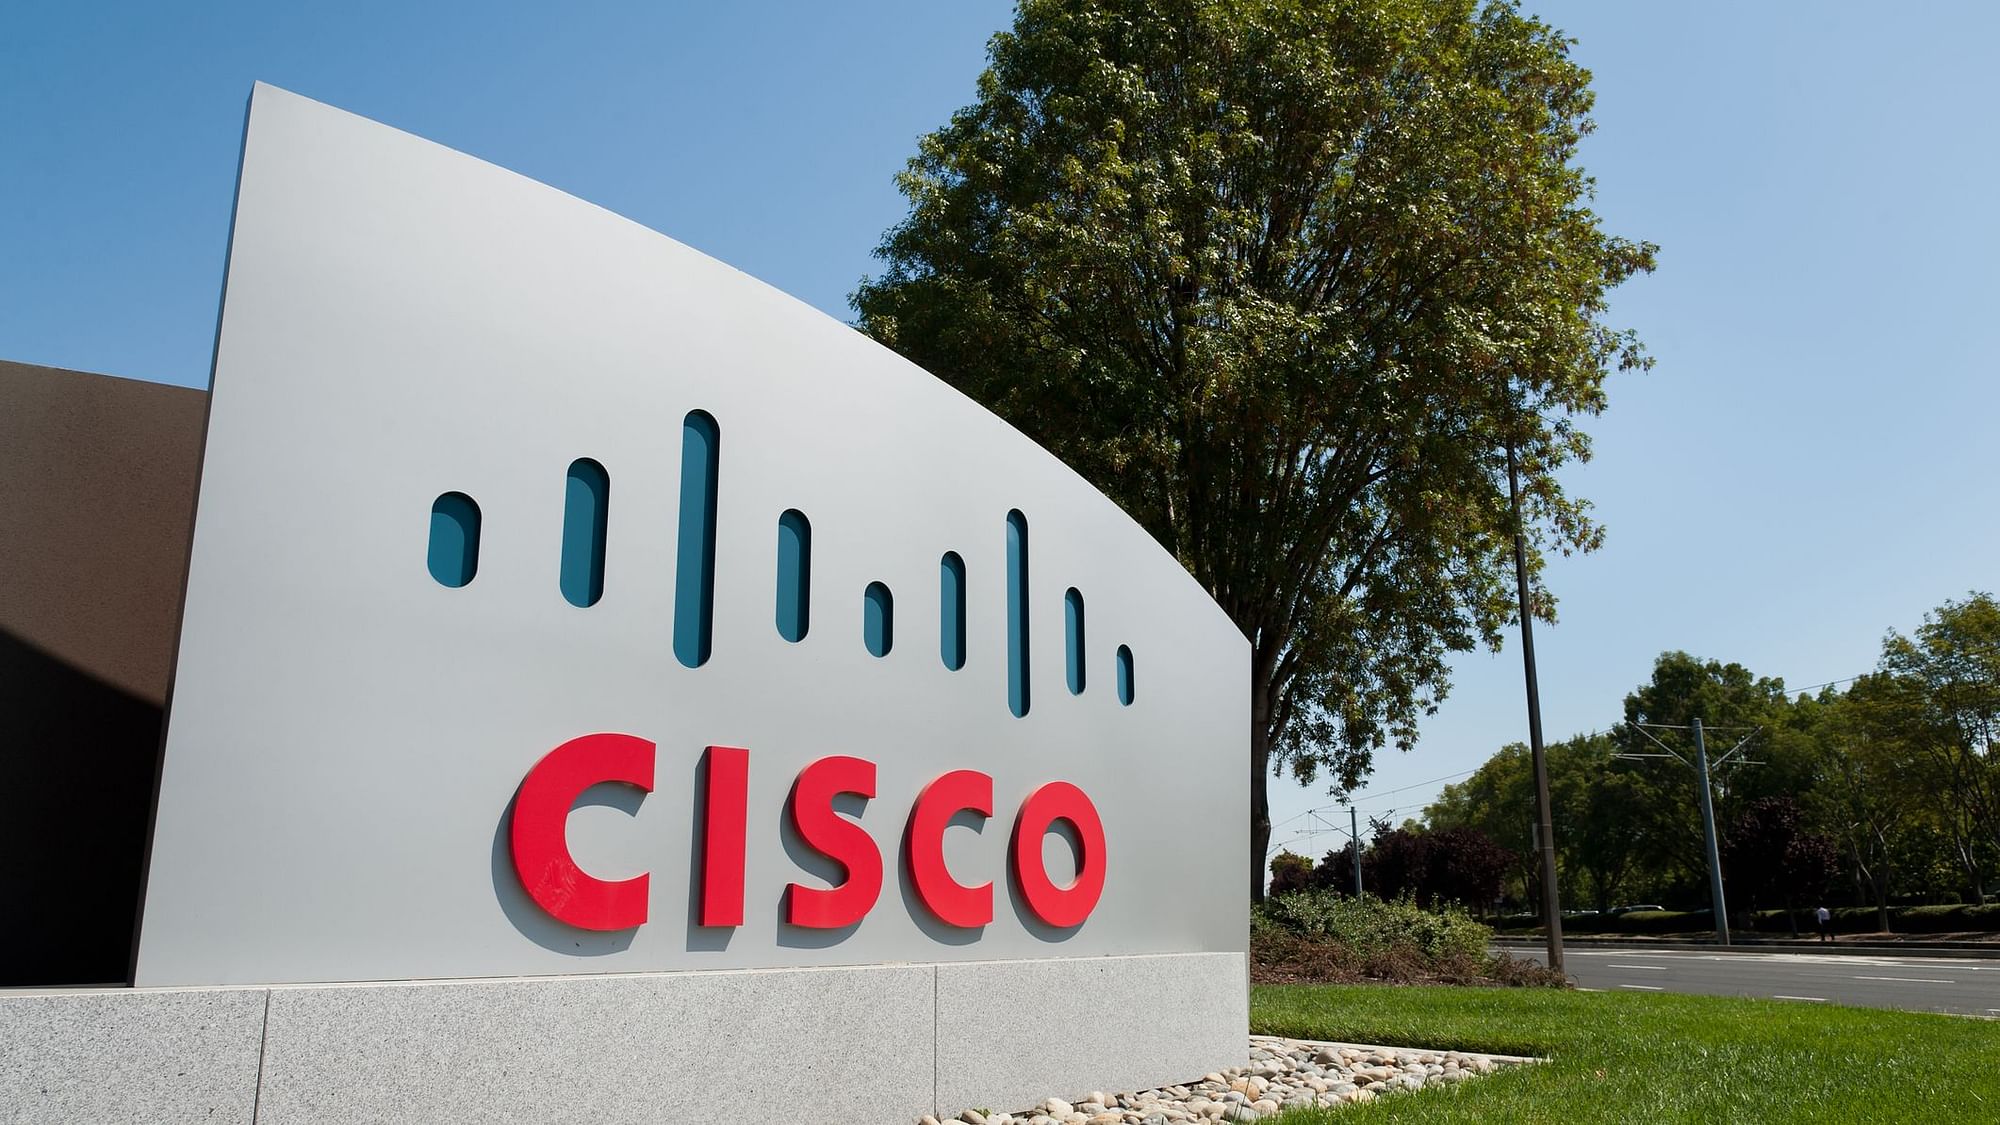 According to the lawsuit, two upper-caste Indian origin men allegedly discriminated against a Dalit employee at Cisco.